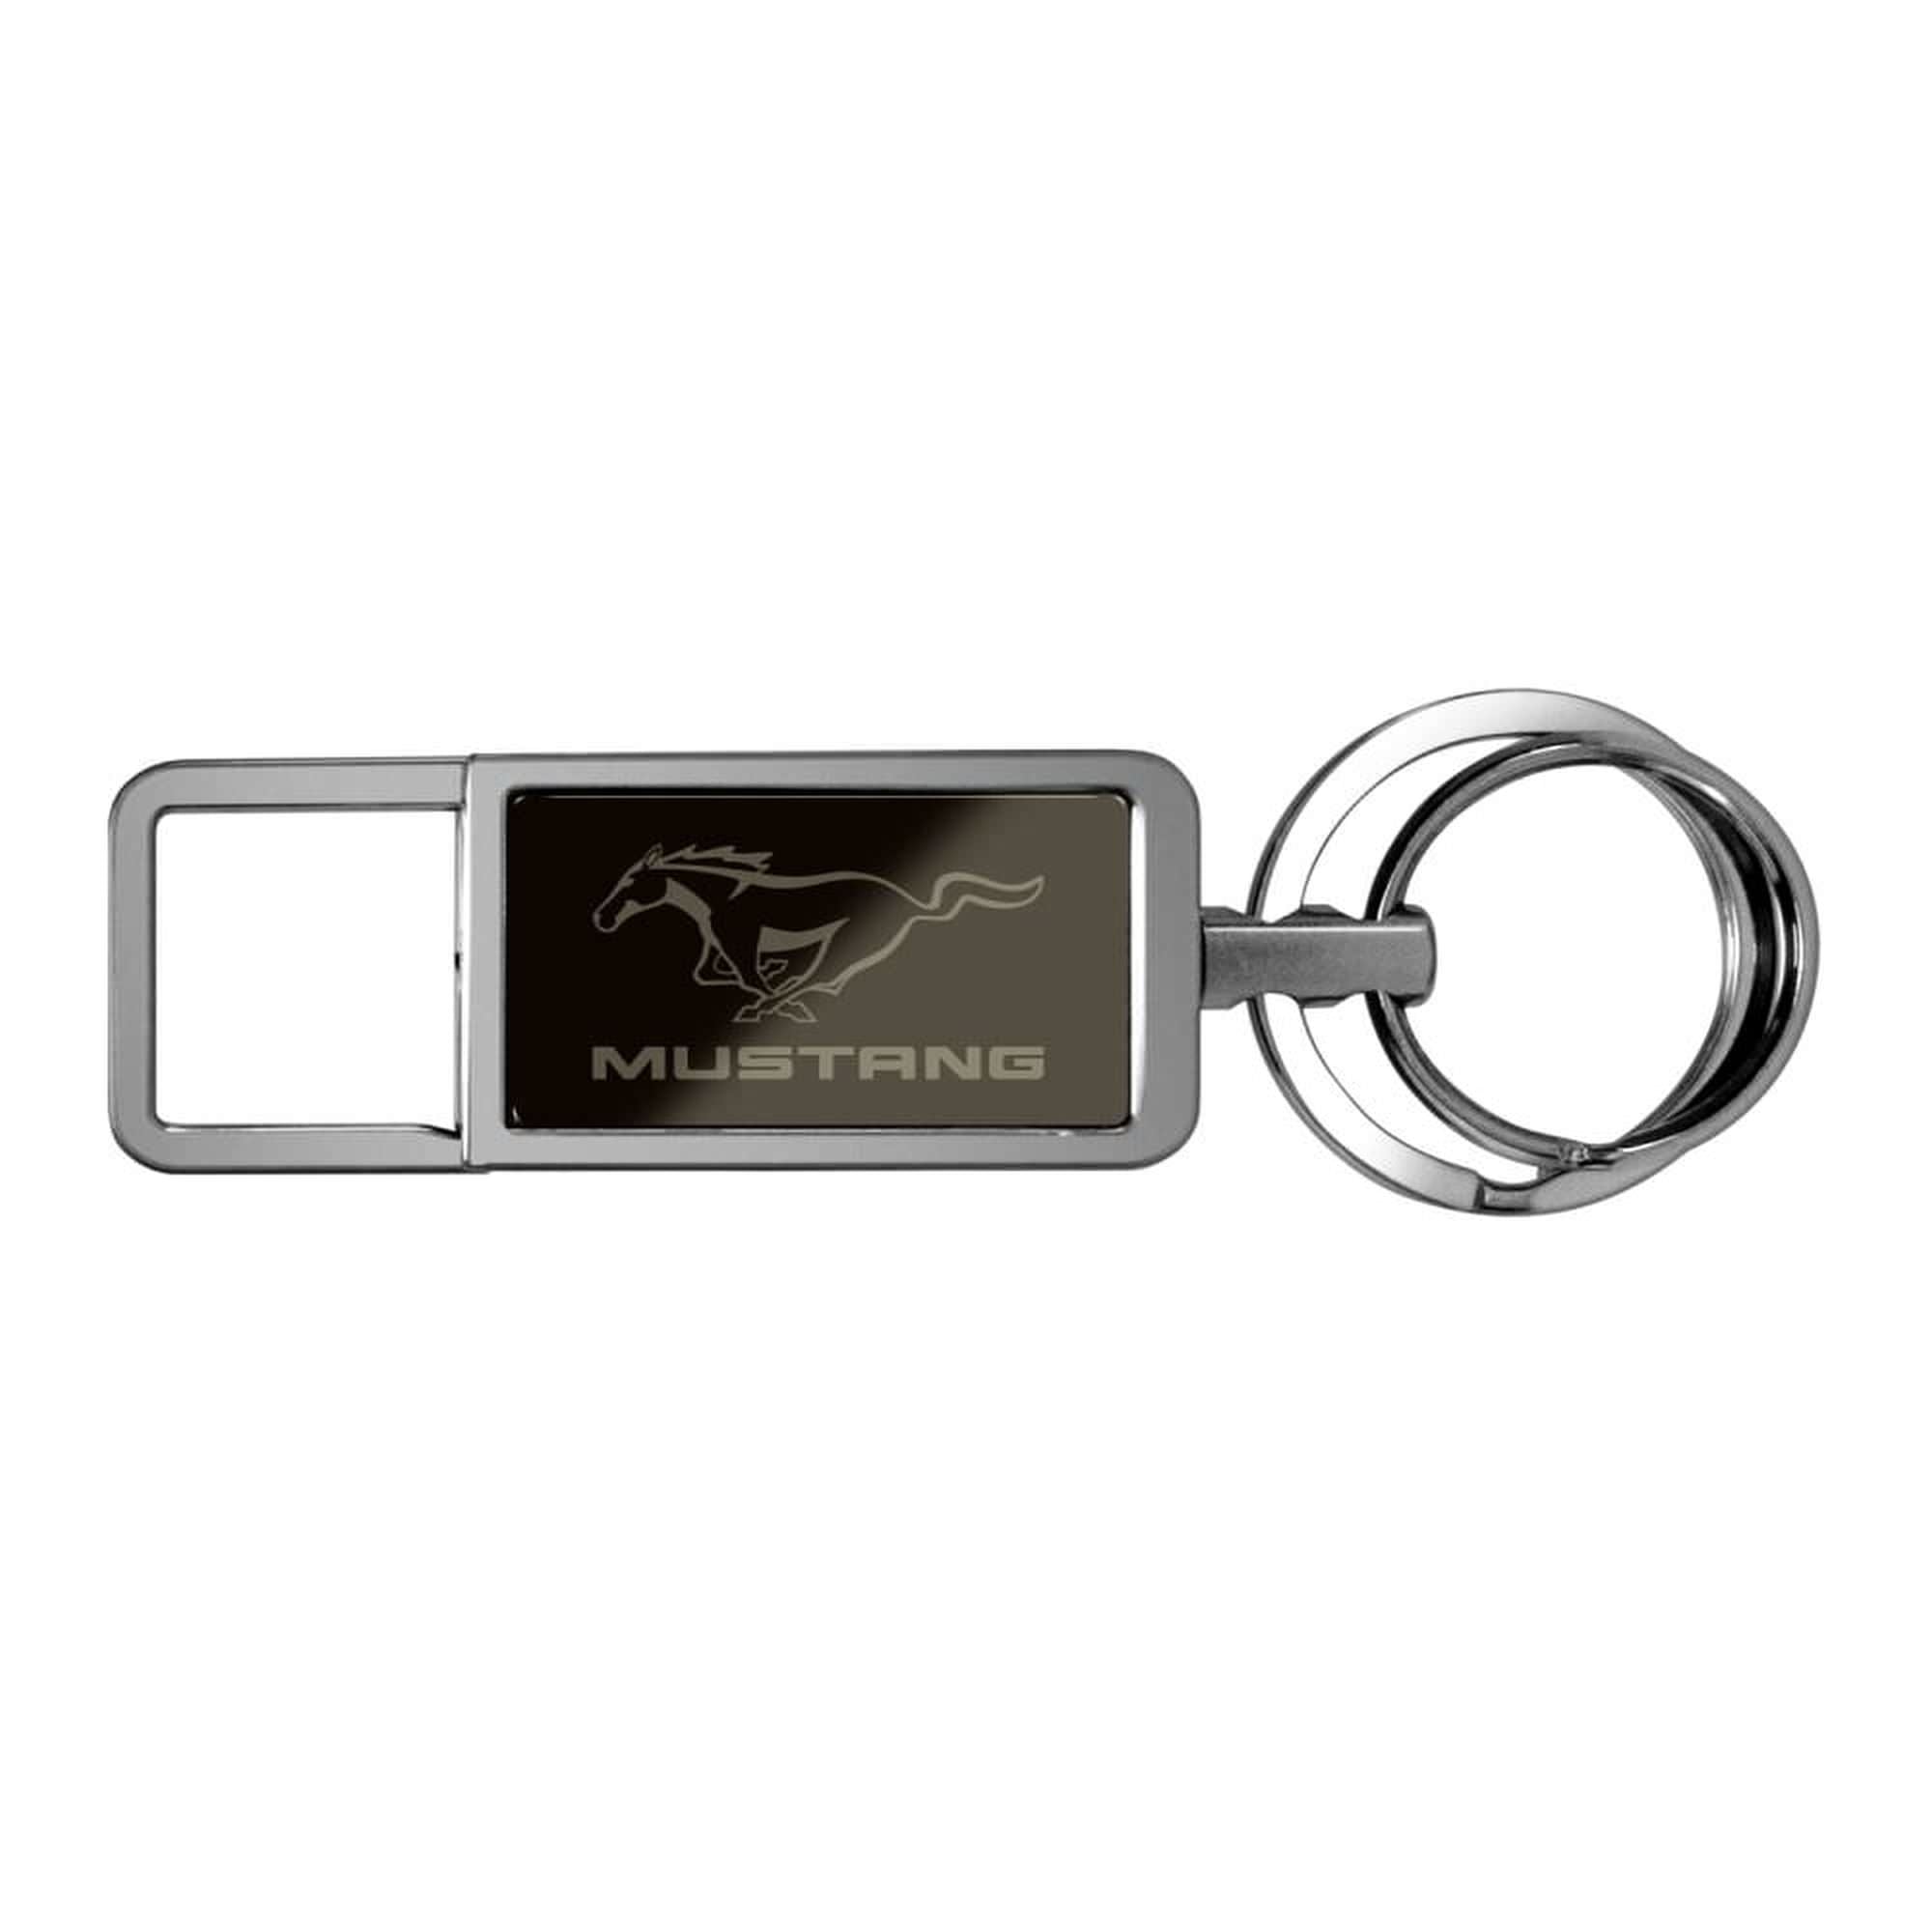 Ford,Mustang,Key Chain